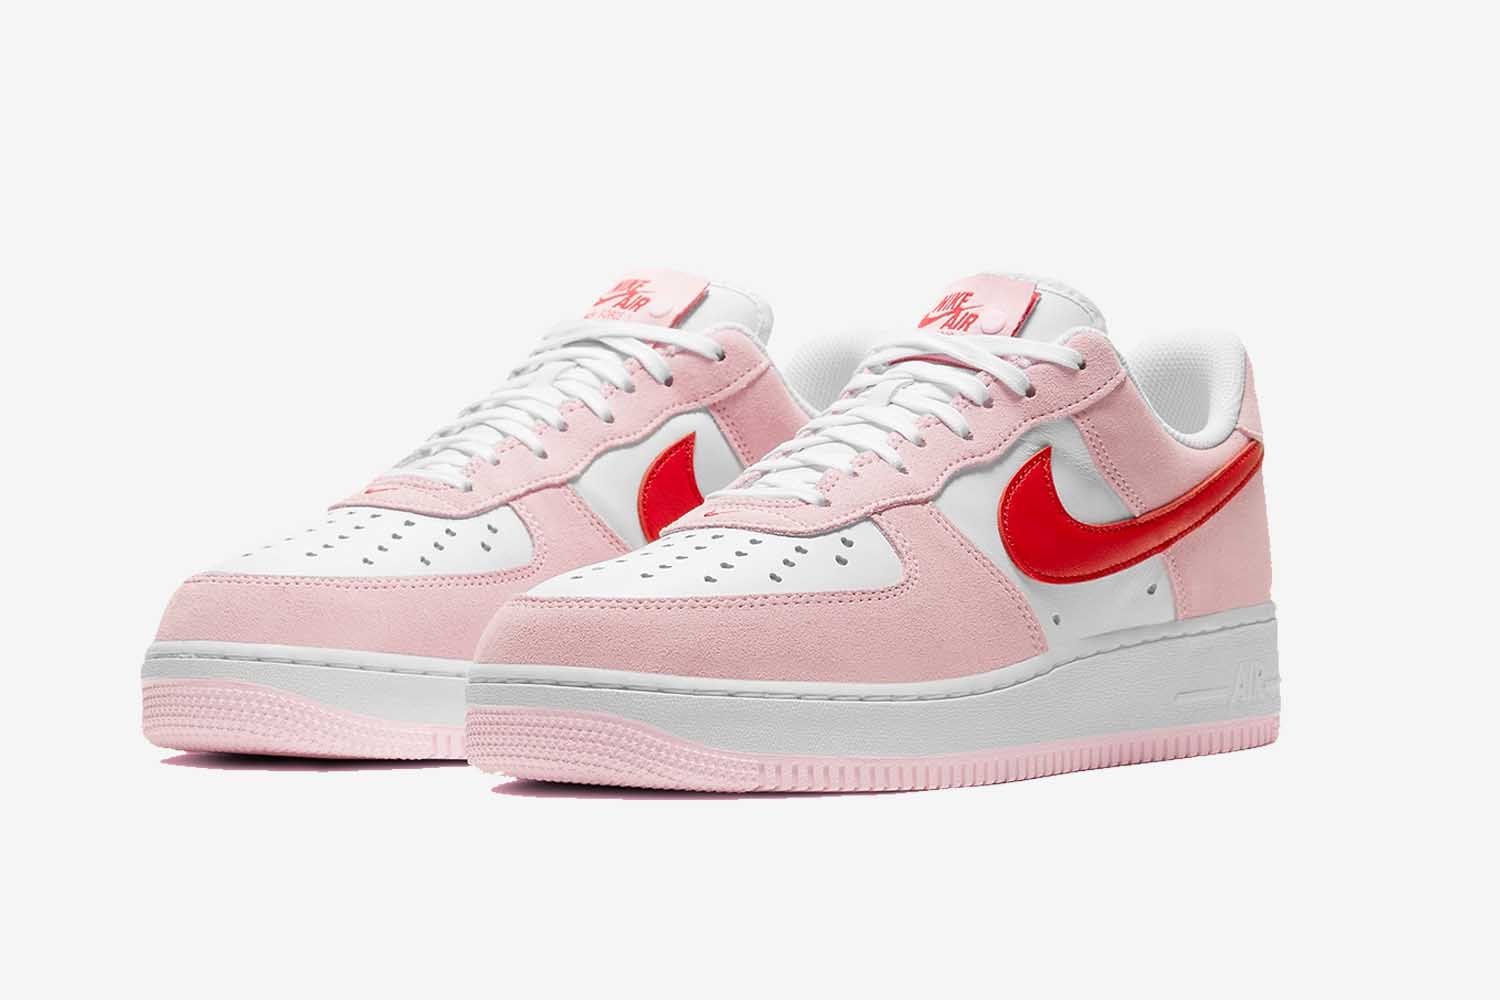 Products of the Week: Everything Bagel-Flavored Ice Cream, V-Day AF1s ...